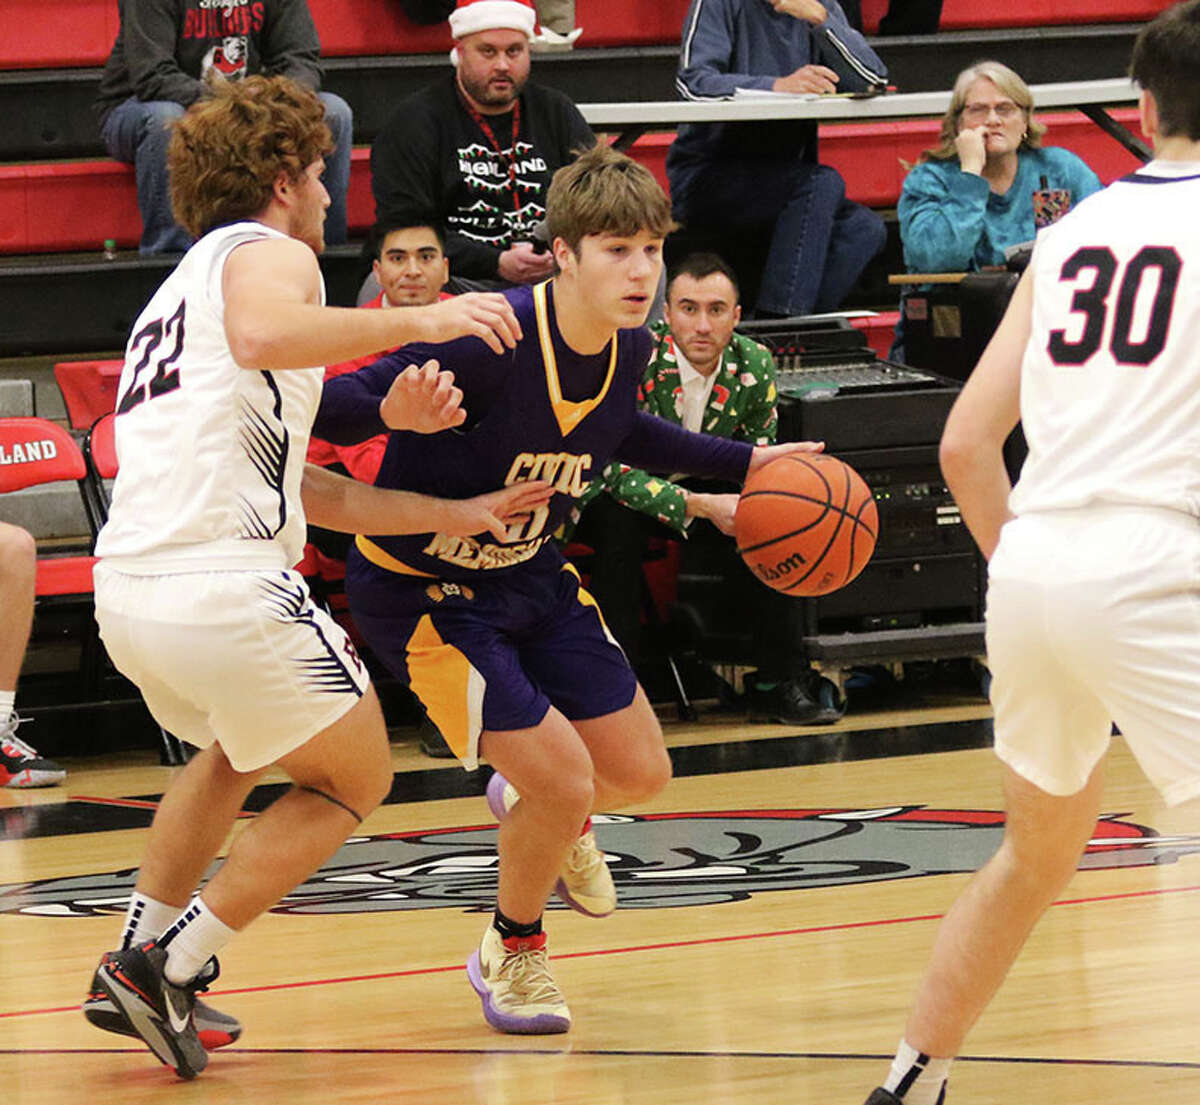 CM's Adam Ogden (middle), shown being guarded by Highland's Cade Altadonna (22) in a Dec. 19 game at Highland, scored a career-high 31 points in Friday's semifinal win at the Litchfield Tourney. On Saturday, CM lost to Triad in the title game, with Ogden earning all-tourney honors.